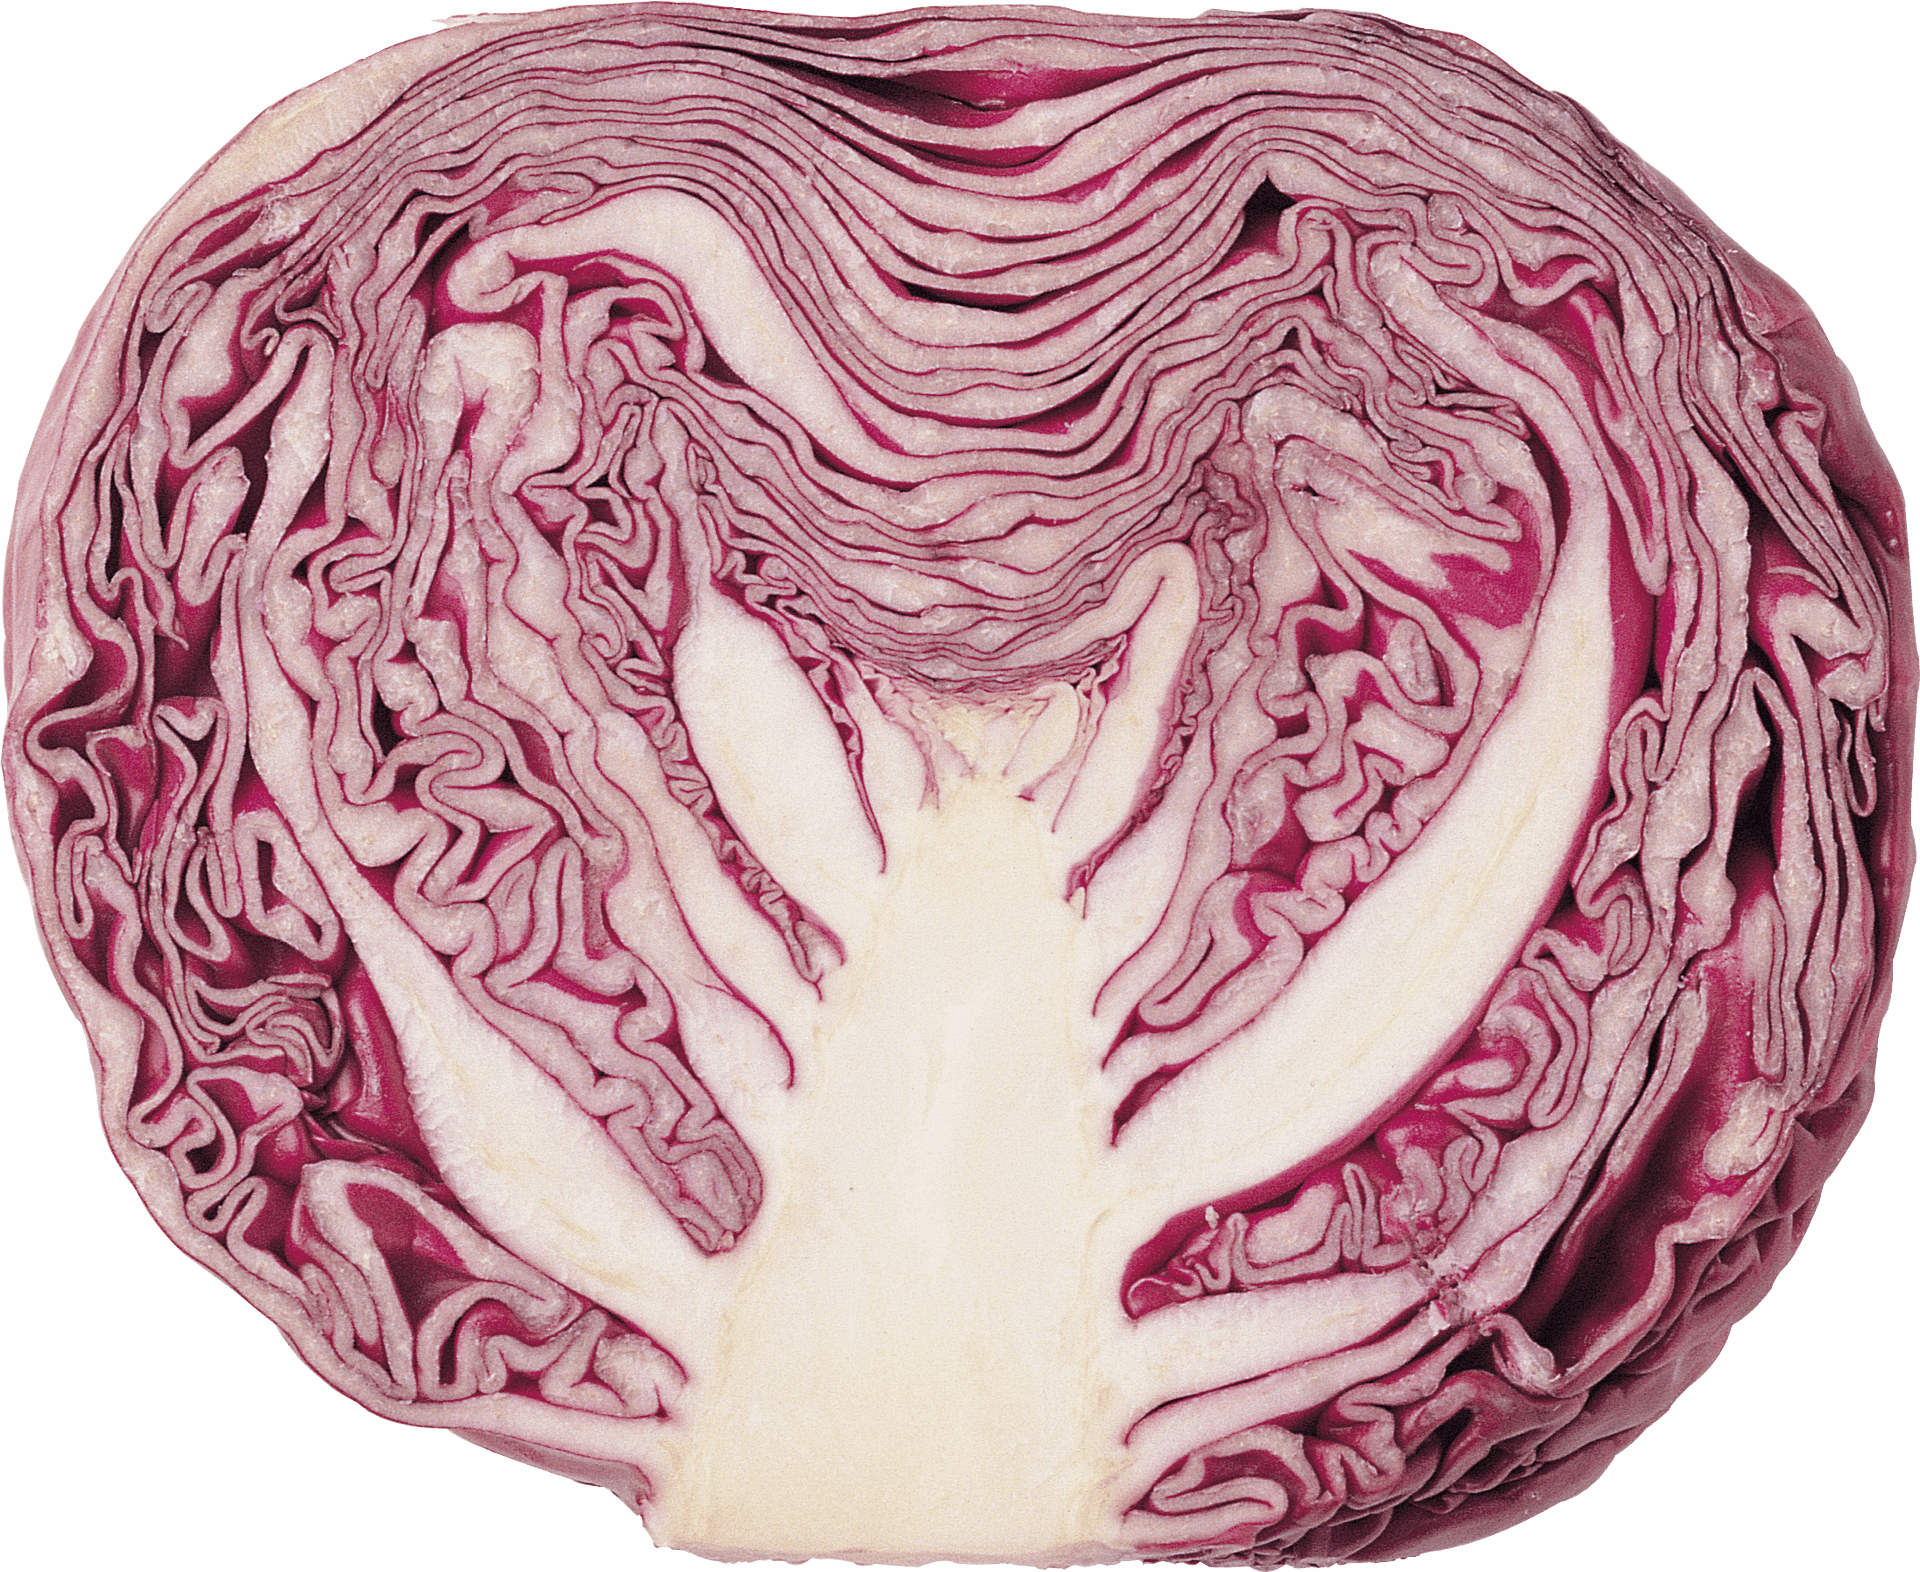 Red Cabbage Cross Section.png PNG